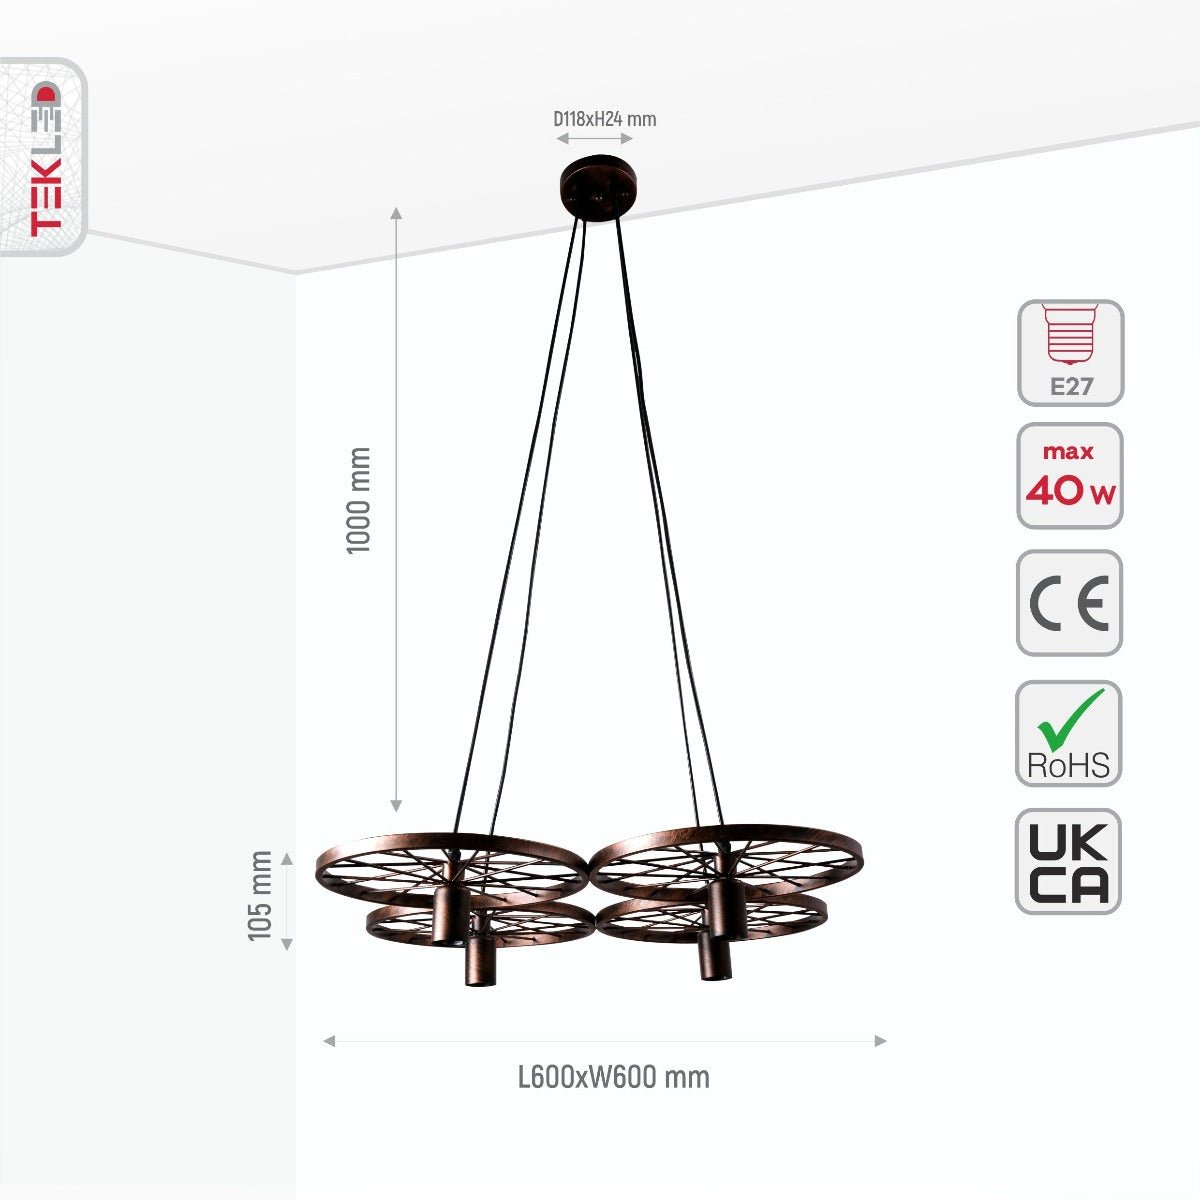 Size and specs of Vintage Industrial Wagon Wheel Pendant Light with 4xE27 Fitting | TEKLED 158-17894